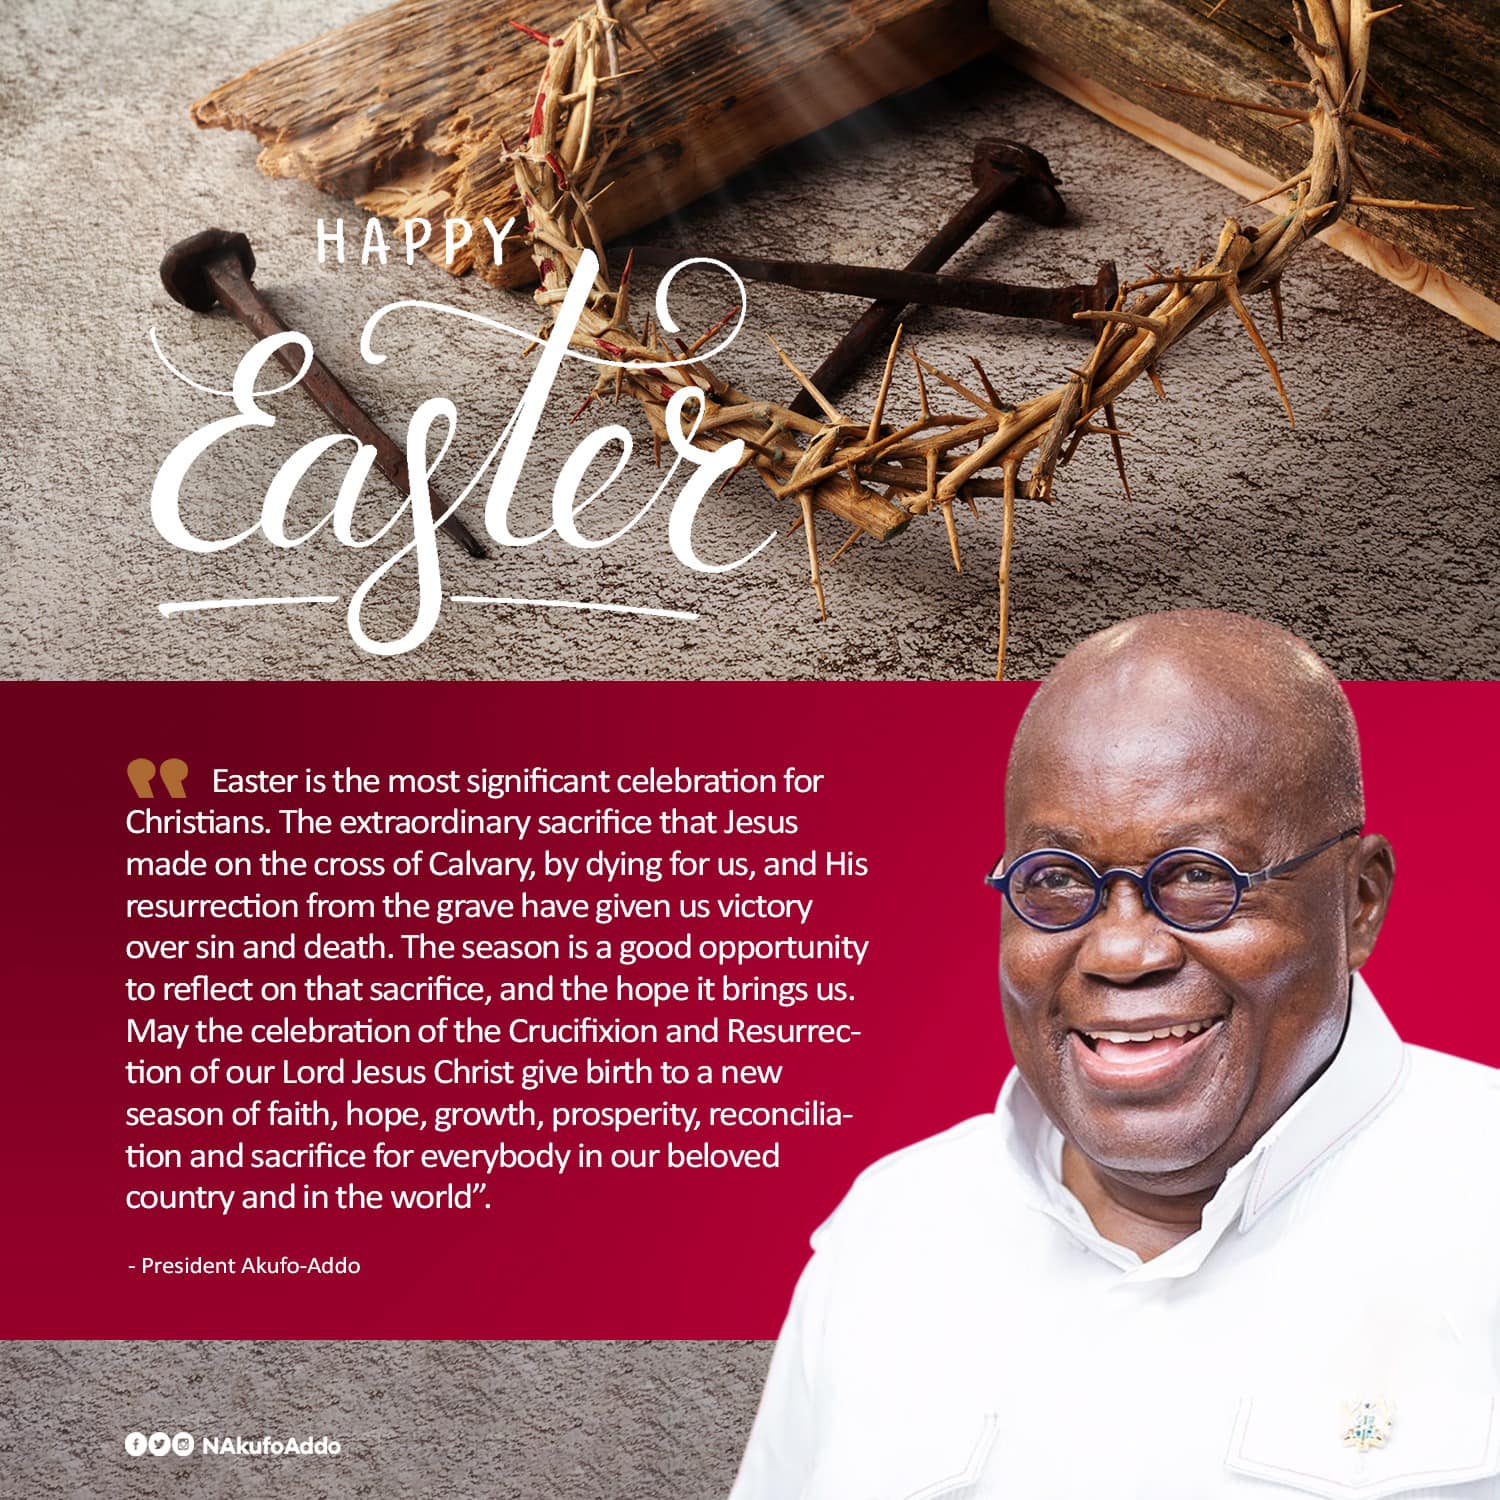 Akufo-Addo's Easter message.